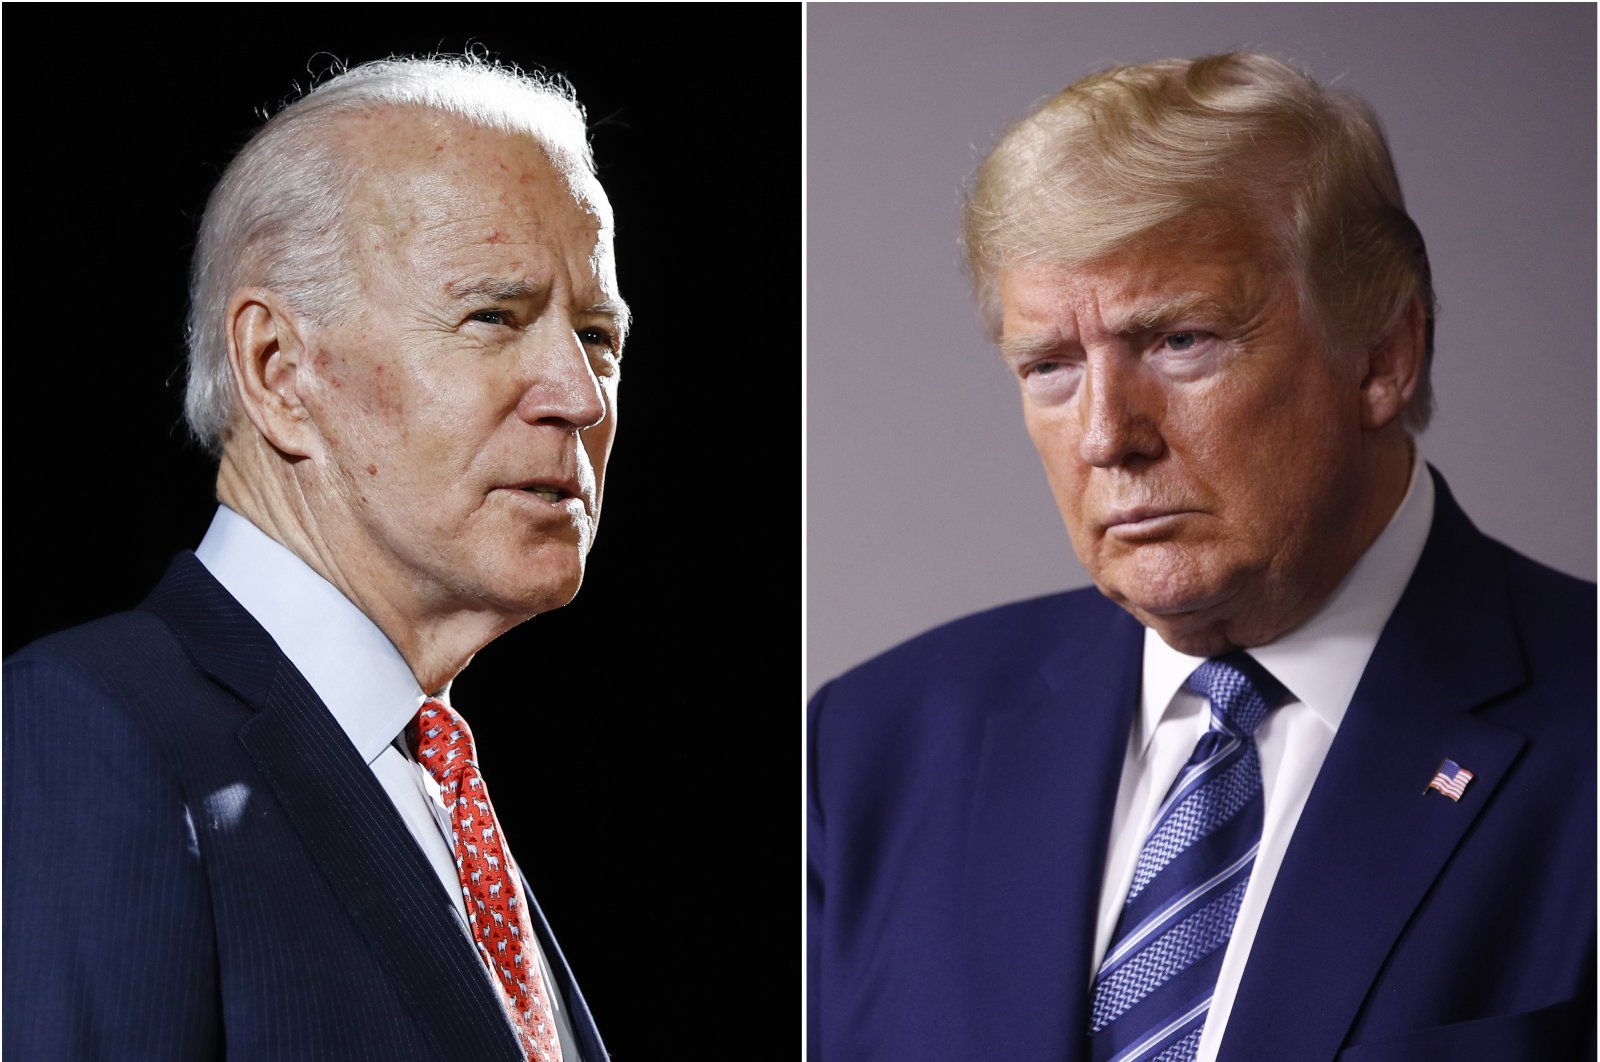  In this combination of file photos, former President Joe Biden speaks in Wilmington, Del., on March 12, 2020, left, and former President Donald Trump speaks at the White House in Washington on April 5, 2020. (AP File Photo)